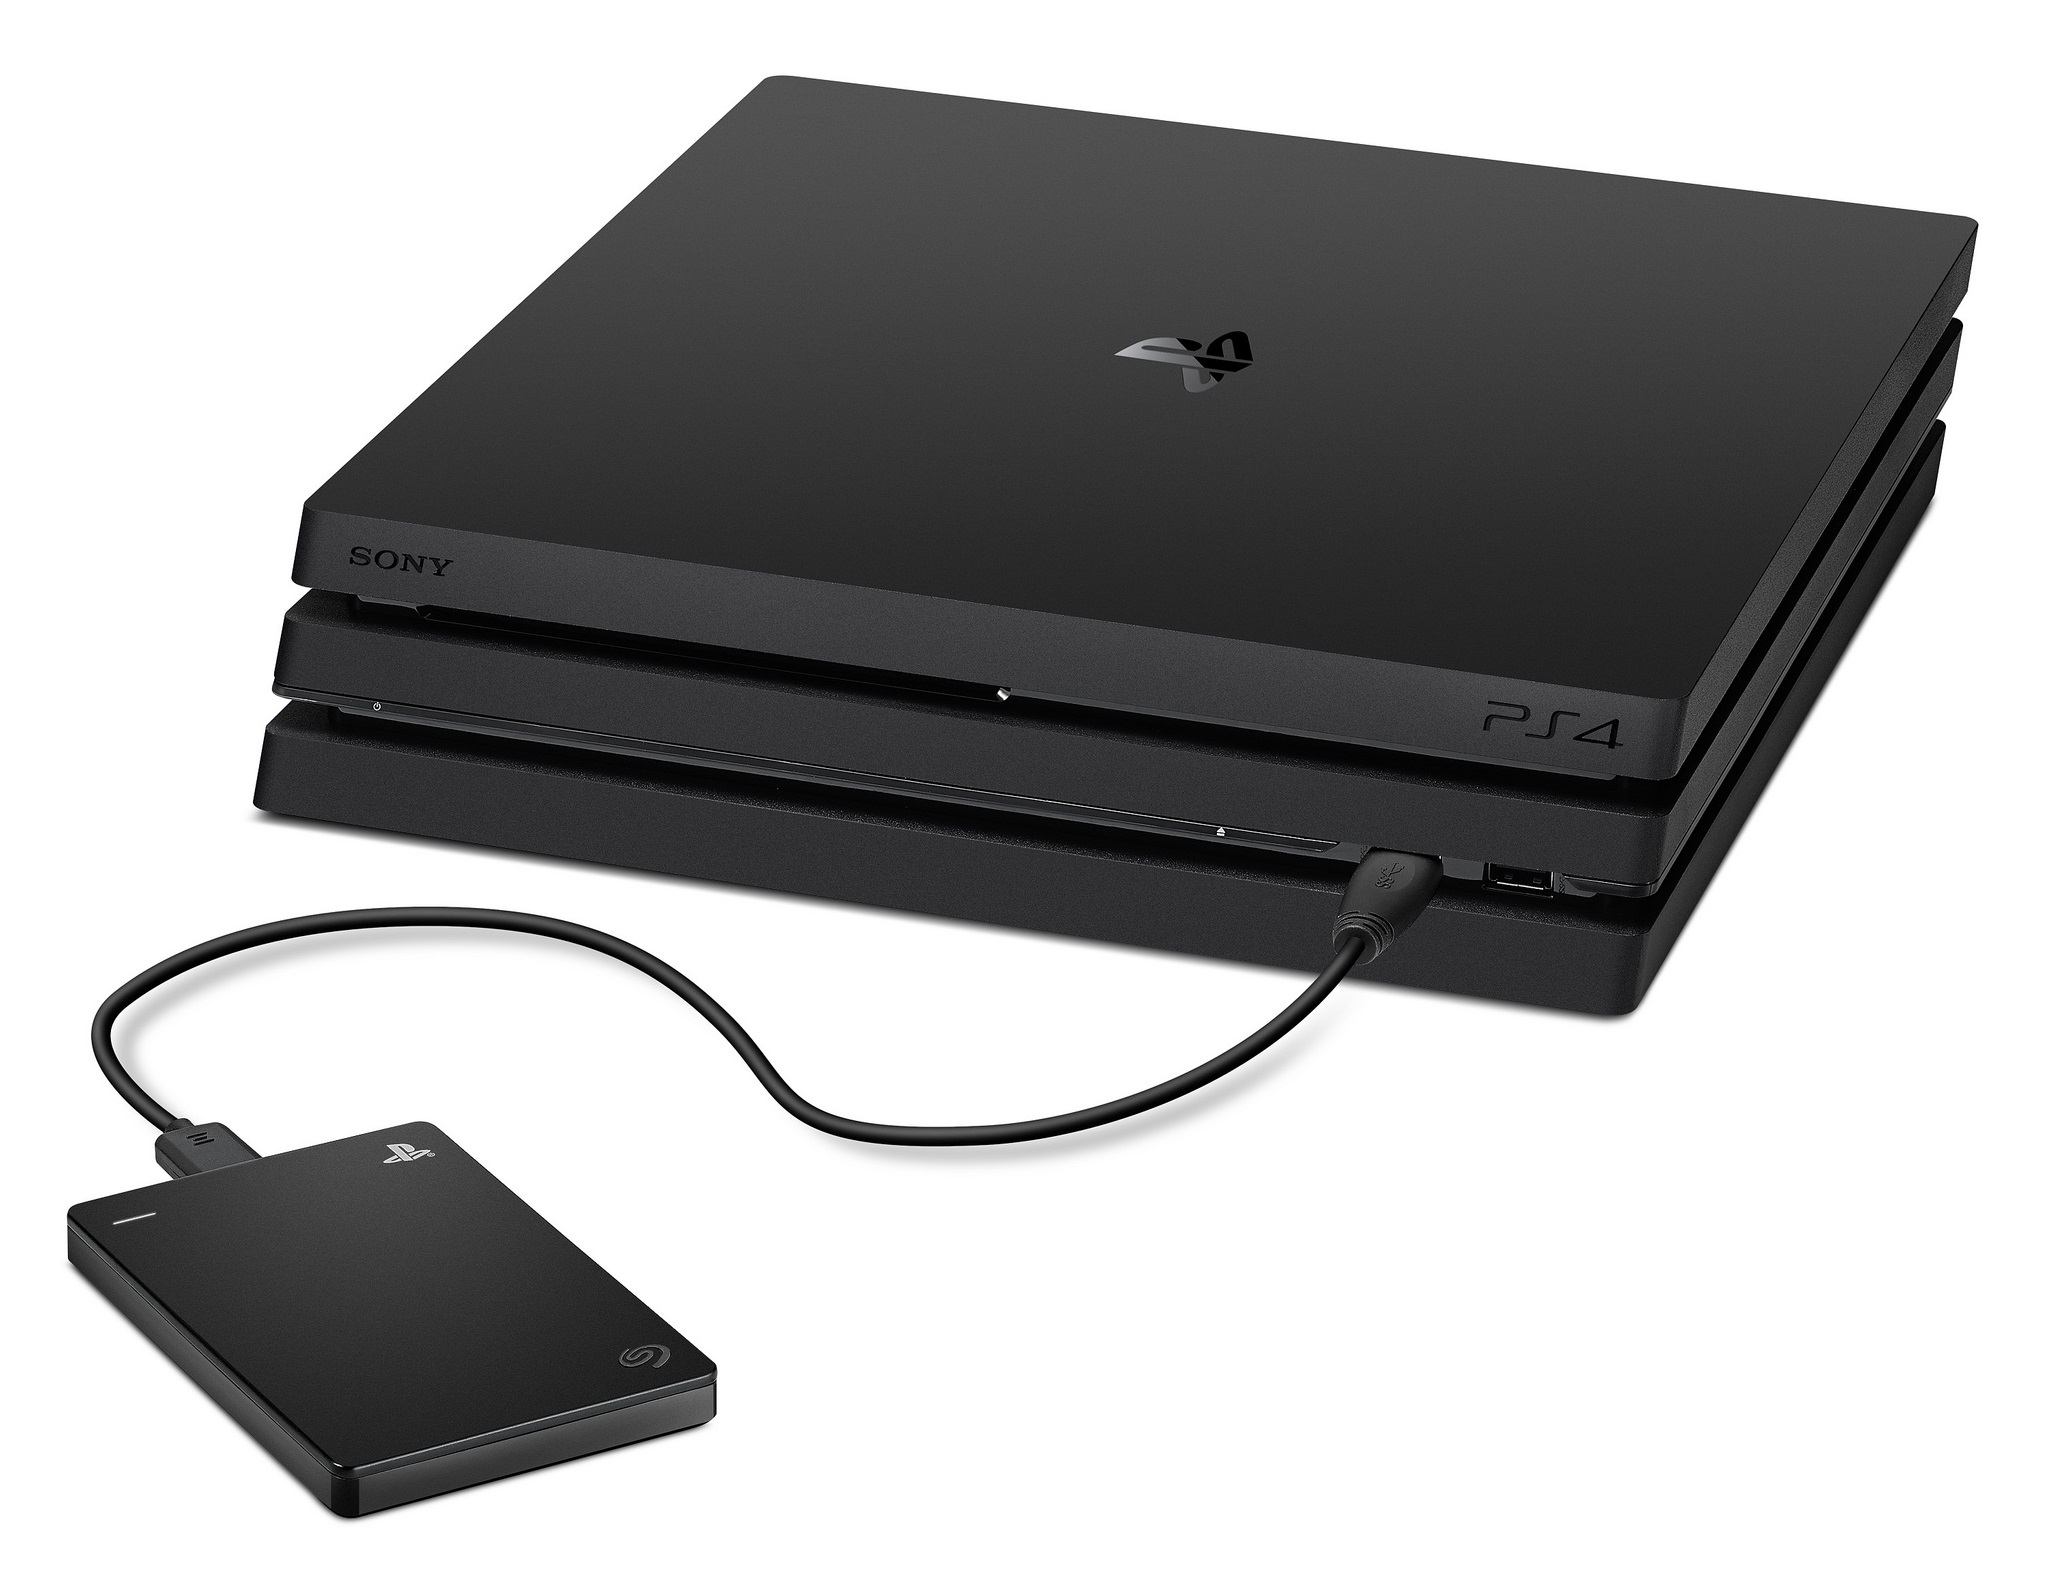 External HDD vs SSD for PS4  Inside Gaming With Seagate 